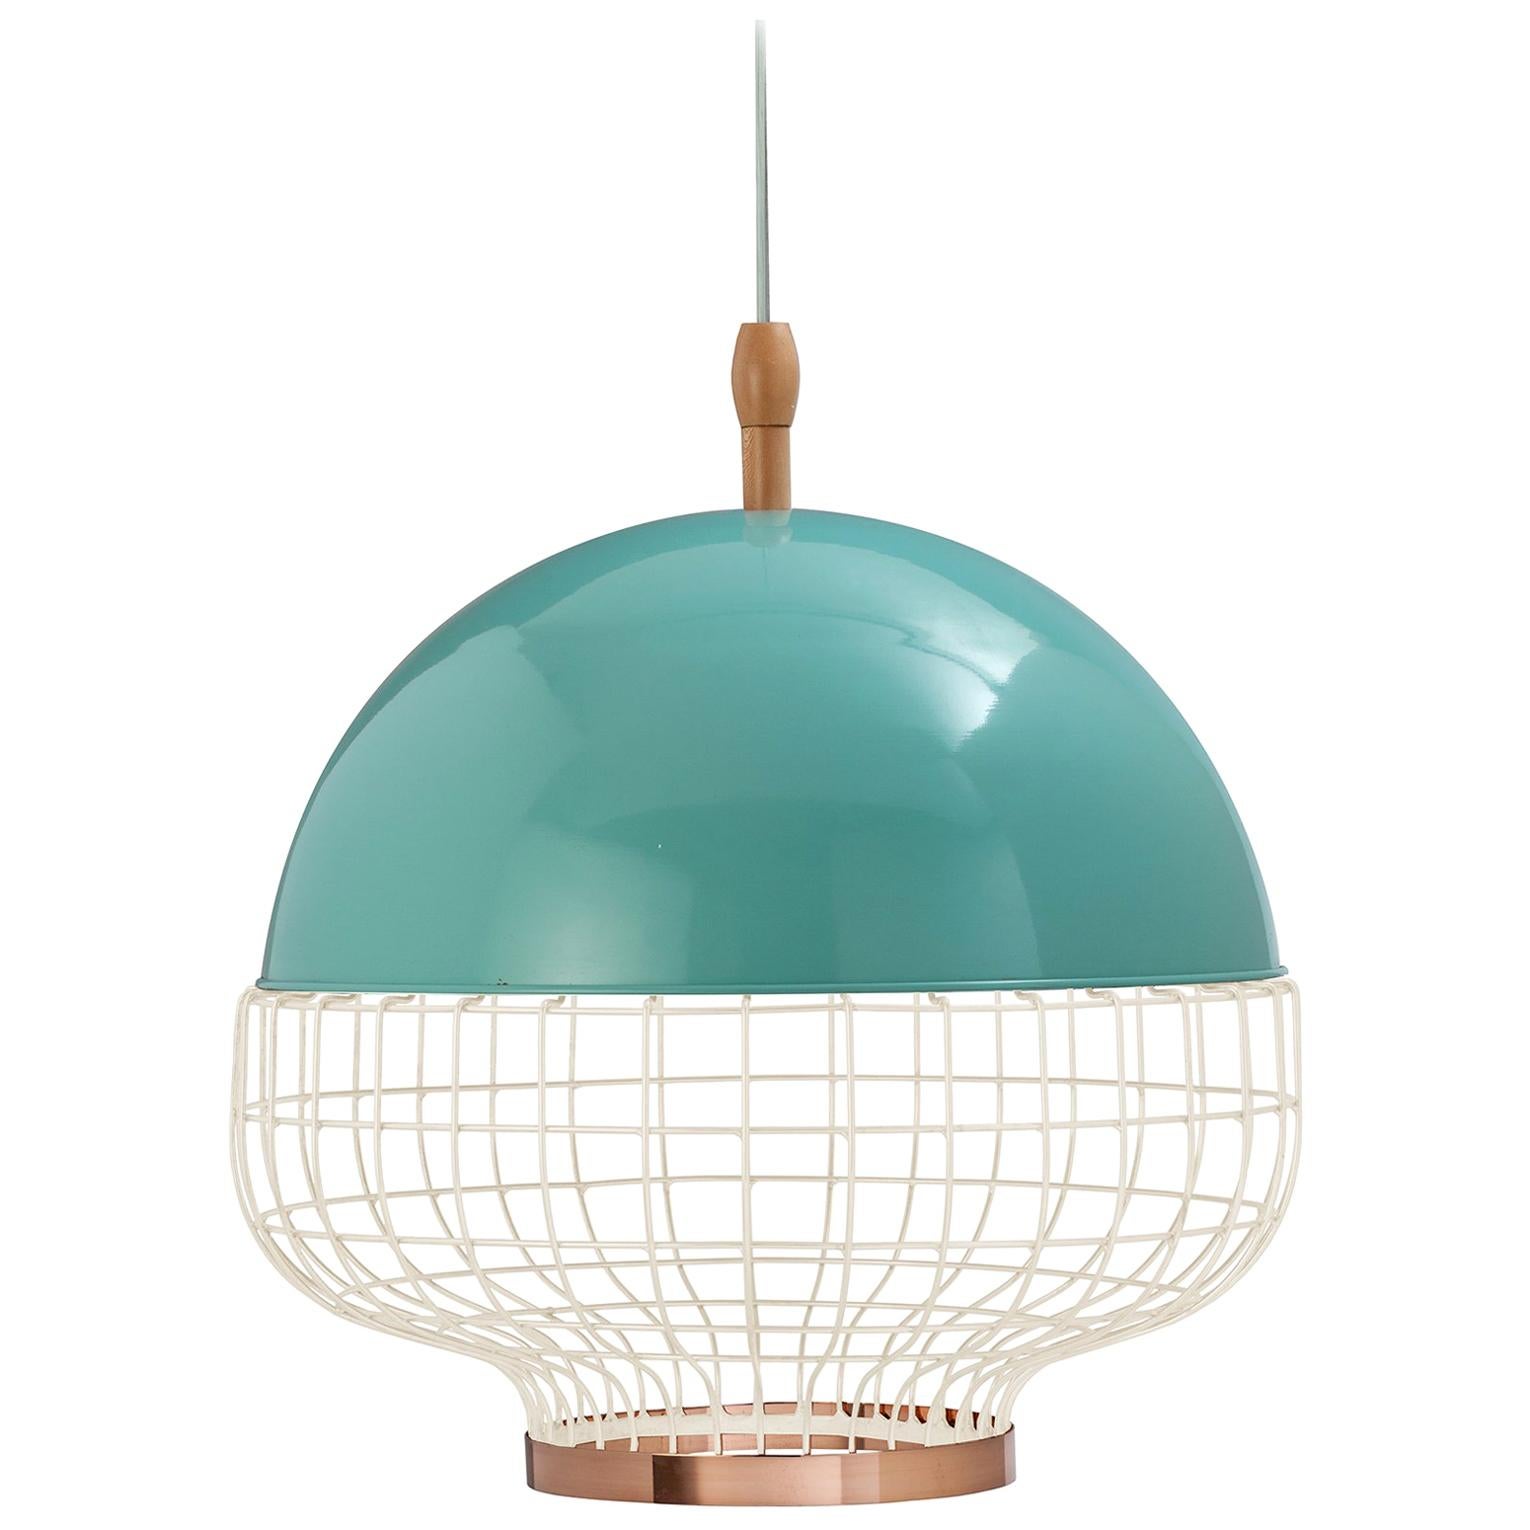 21st Century Art Deco Magnolia I Pendant Lamp Mint Green, Ivory and Copper For Sale